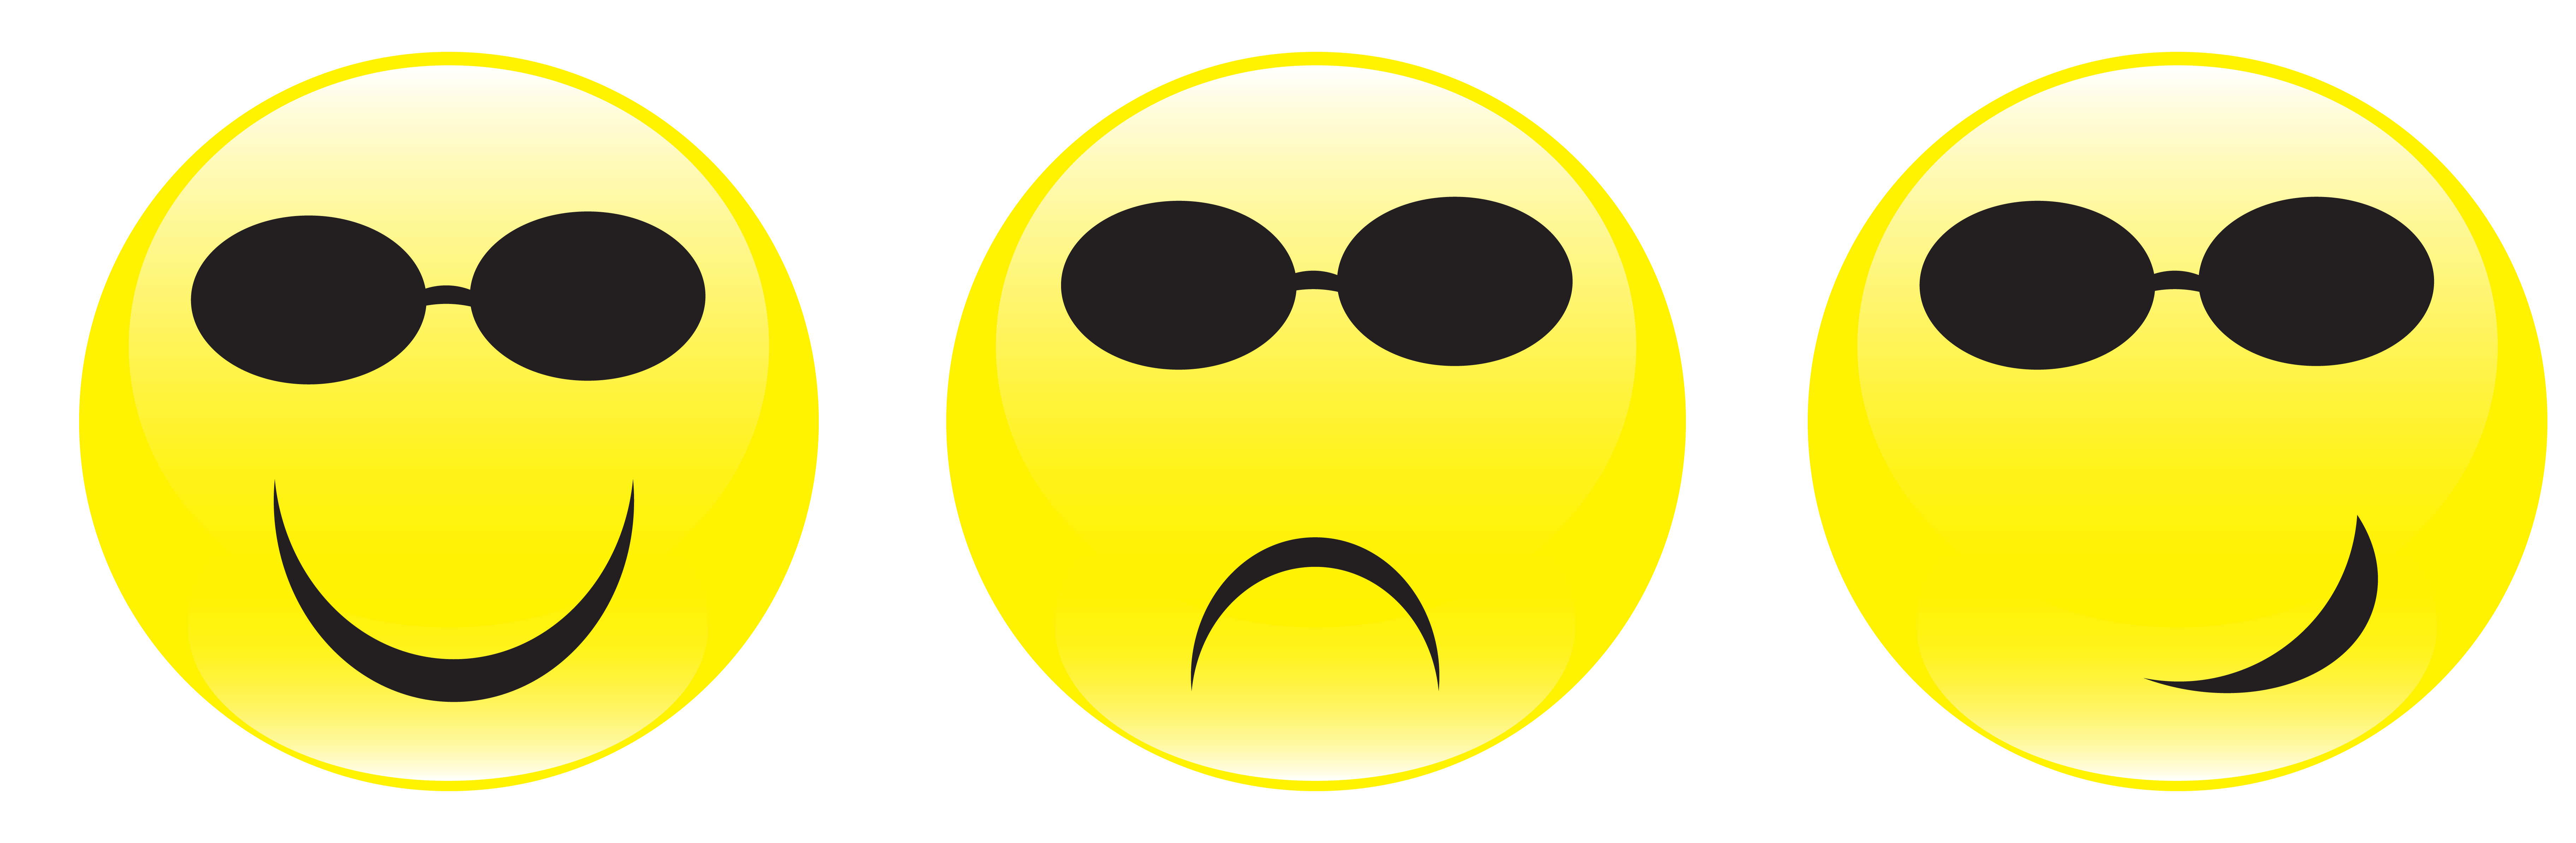 Happy And Sad Face Clip Art - ClipArt Best